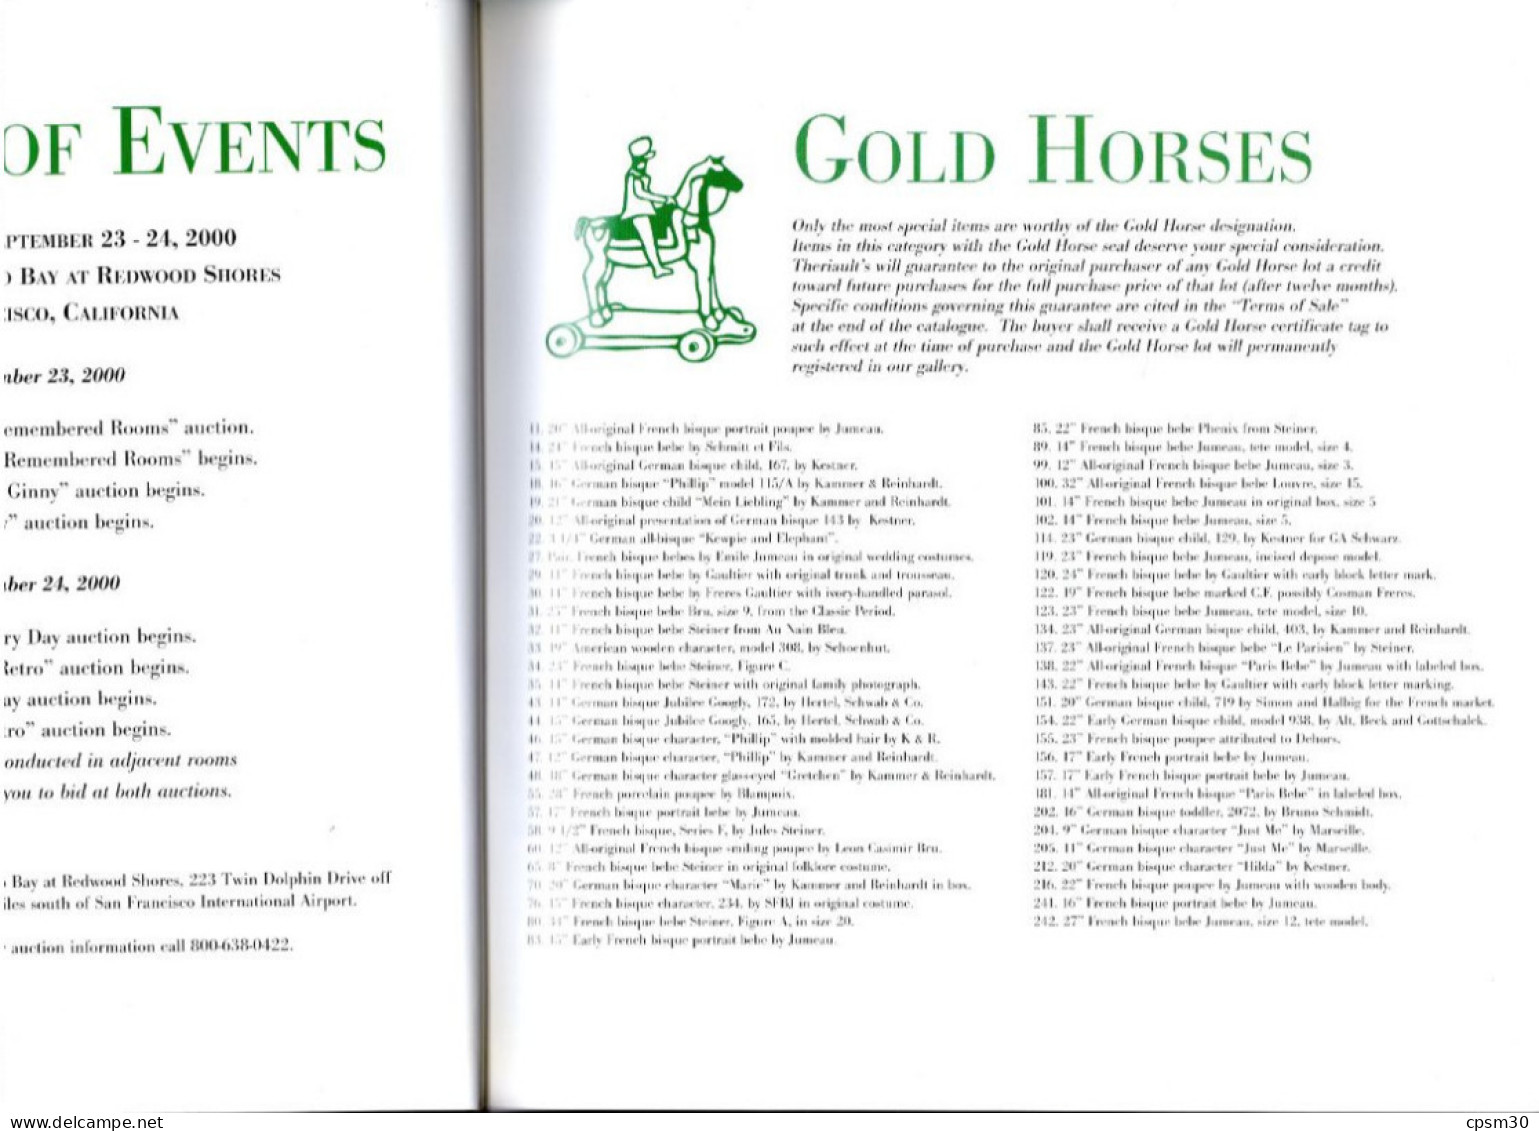 Livre, Echoes Of Old Remembered Rooms, Catalogued Auction Of Rare Antique Dolls And Dollhouses, September 2000 - 1950-Hoy